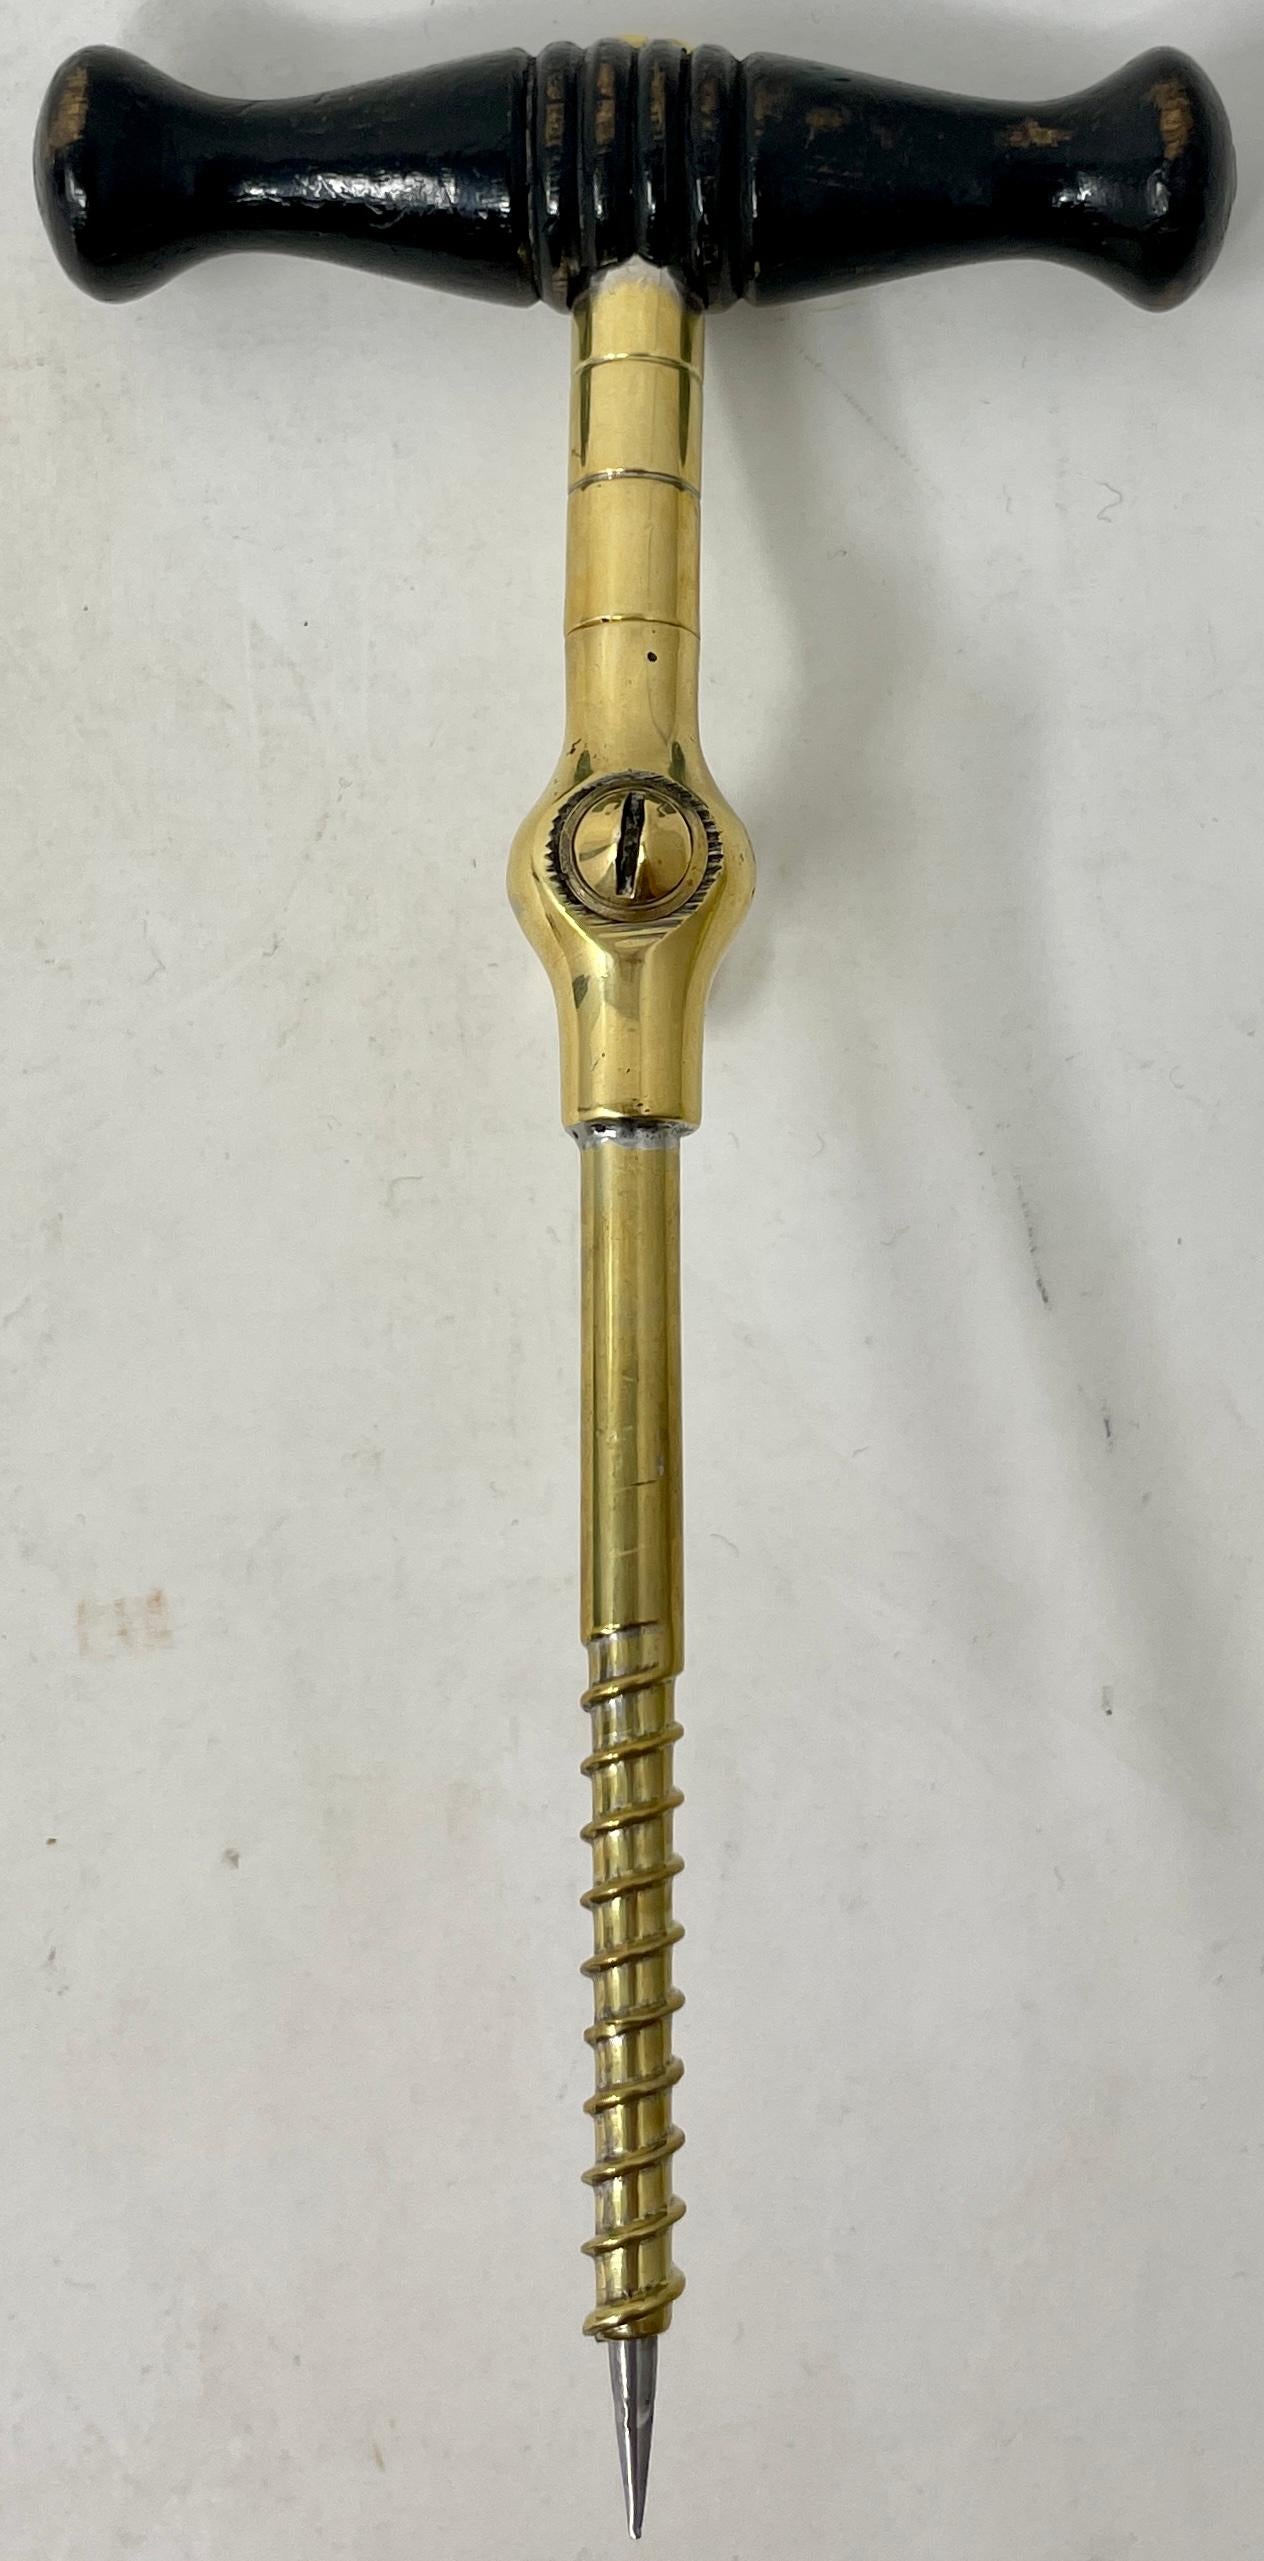 Antique English brass & mahogany champagne tap, two-piece design with removal trocar, Circa 1900.